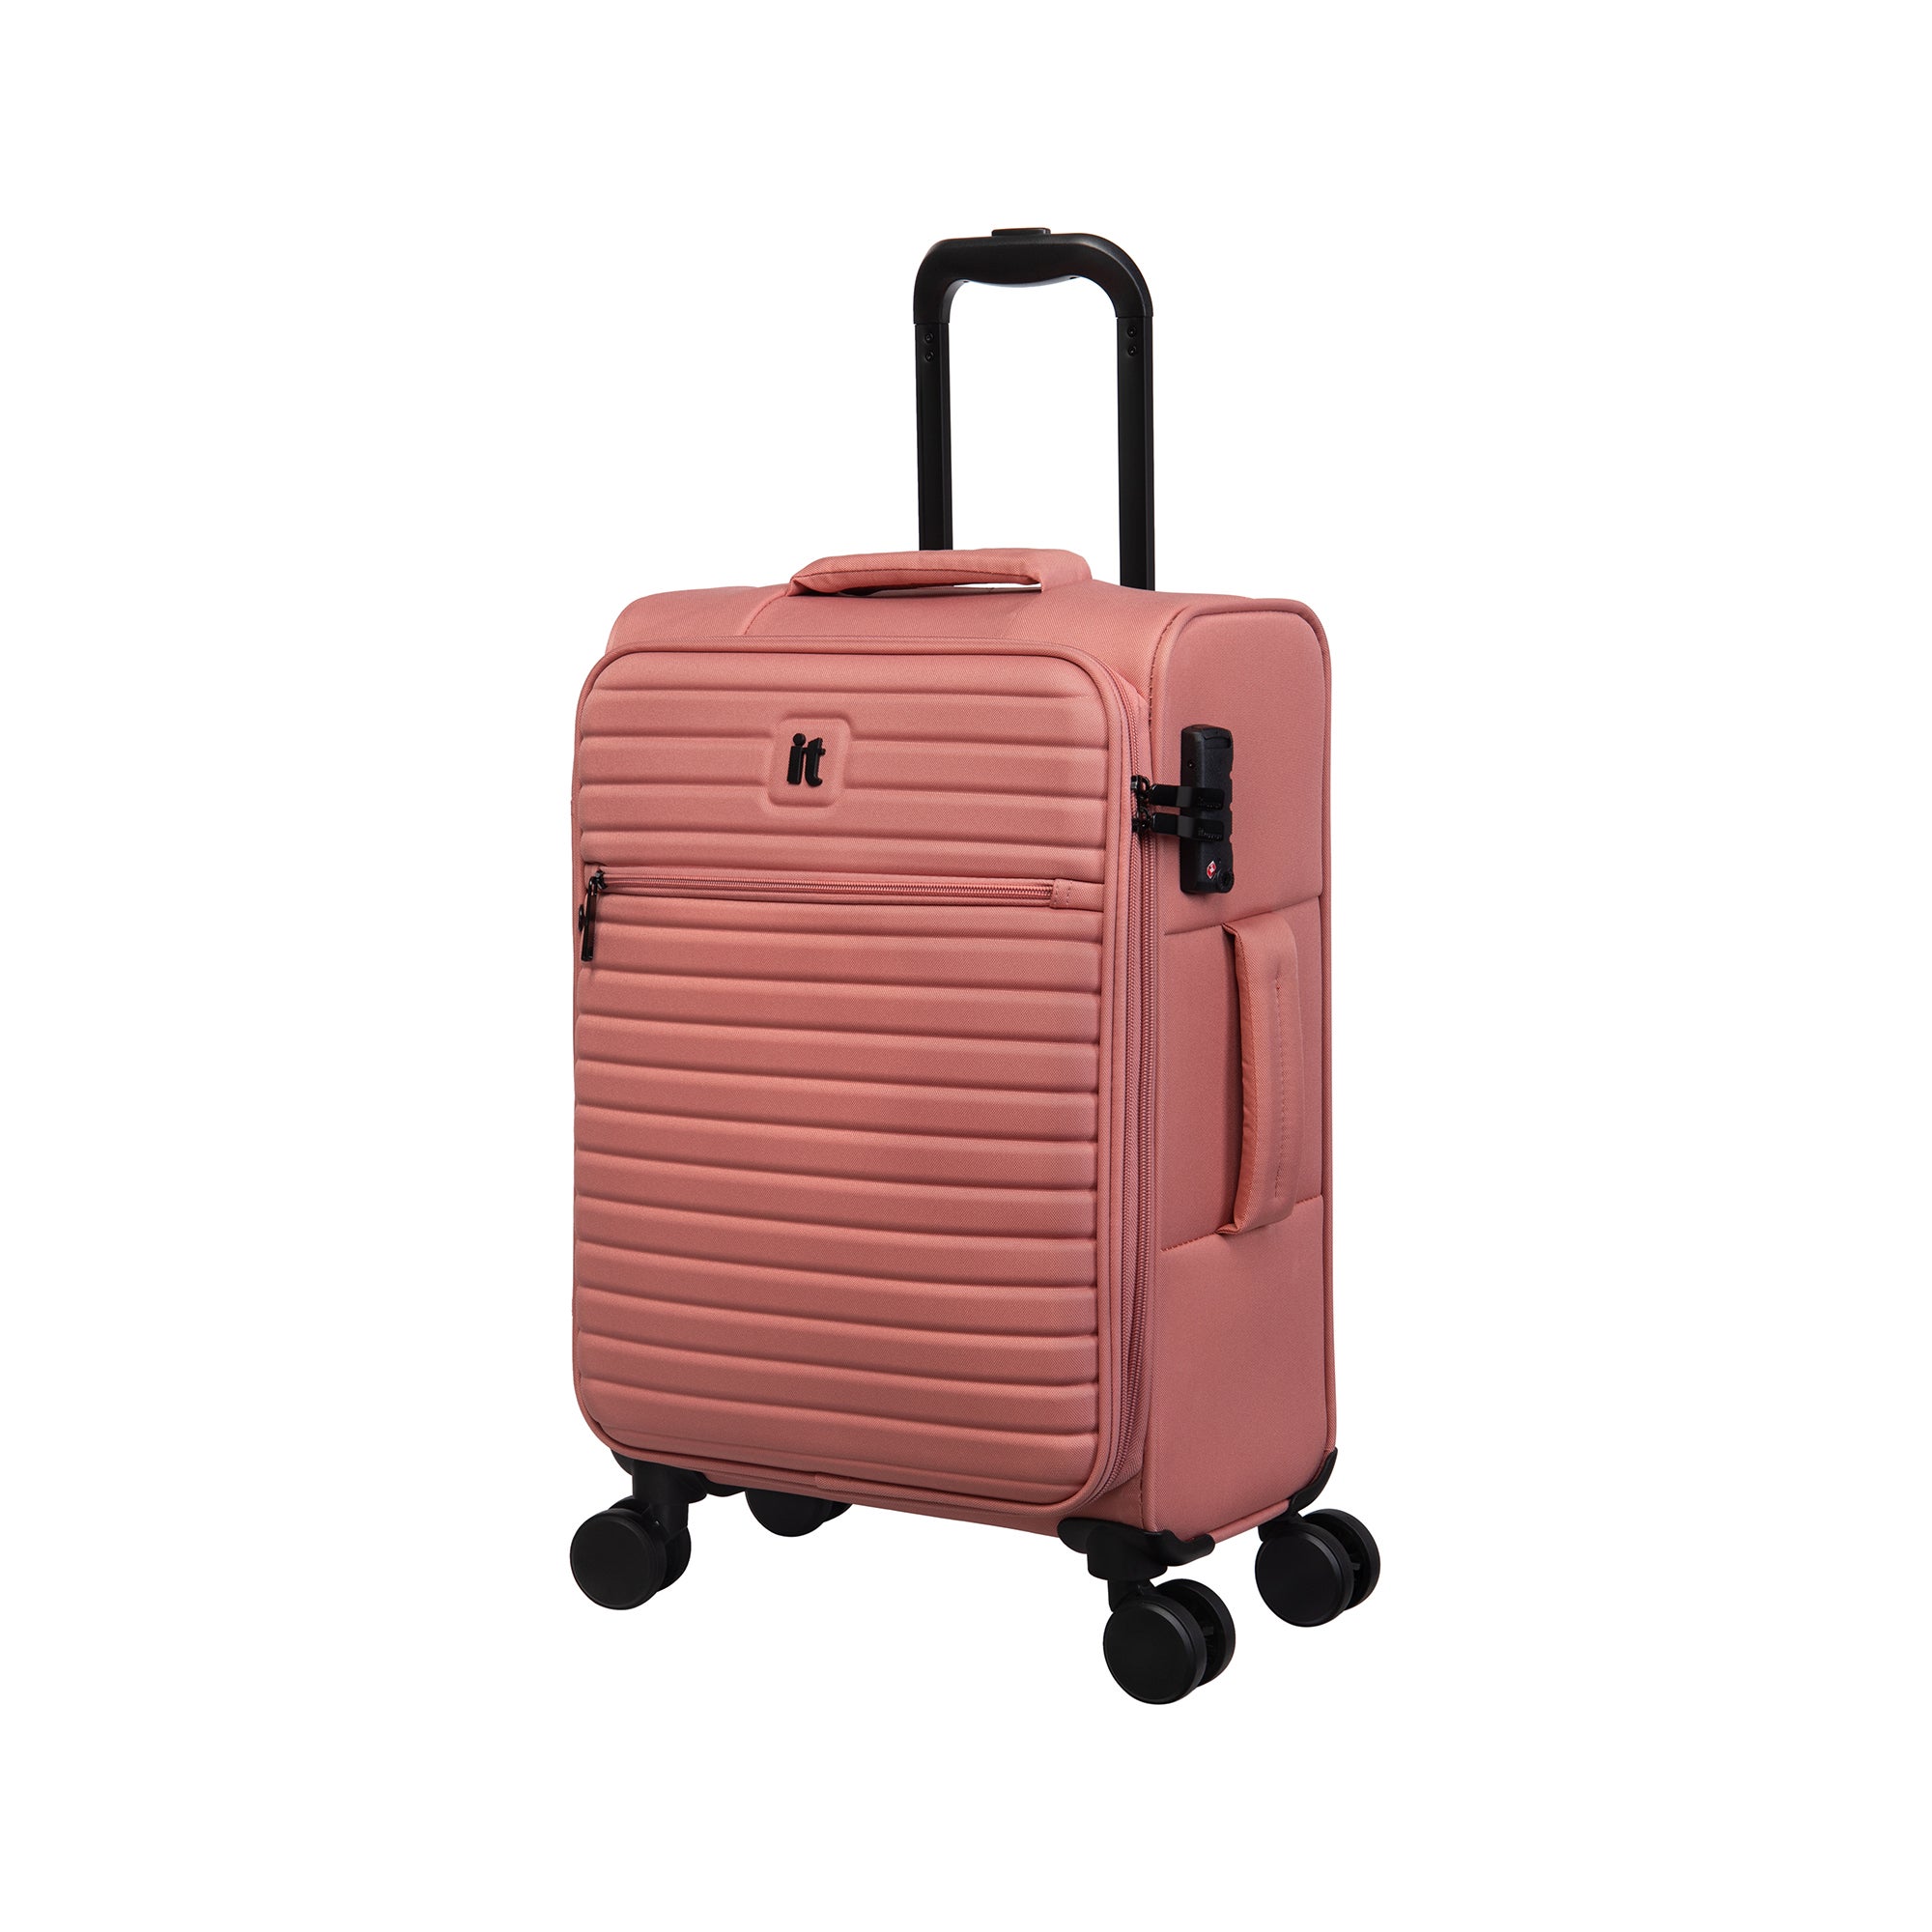 IT Luggage Lineation Soft Shell Cameo Suitcase